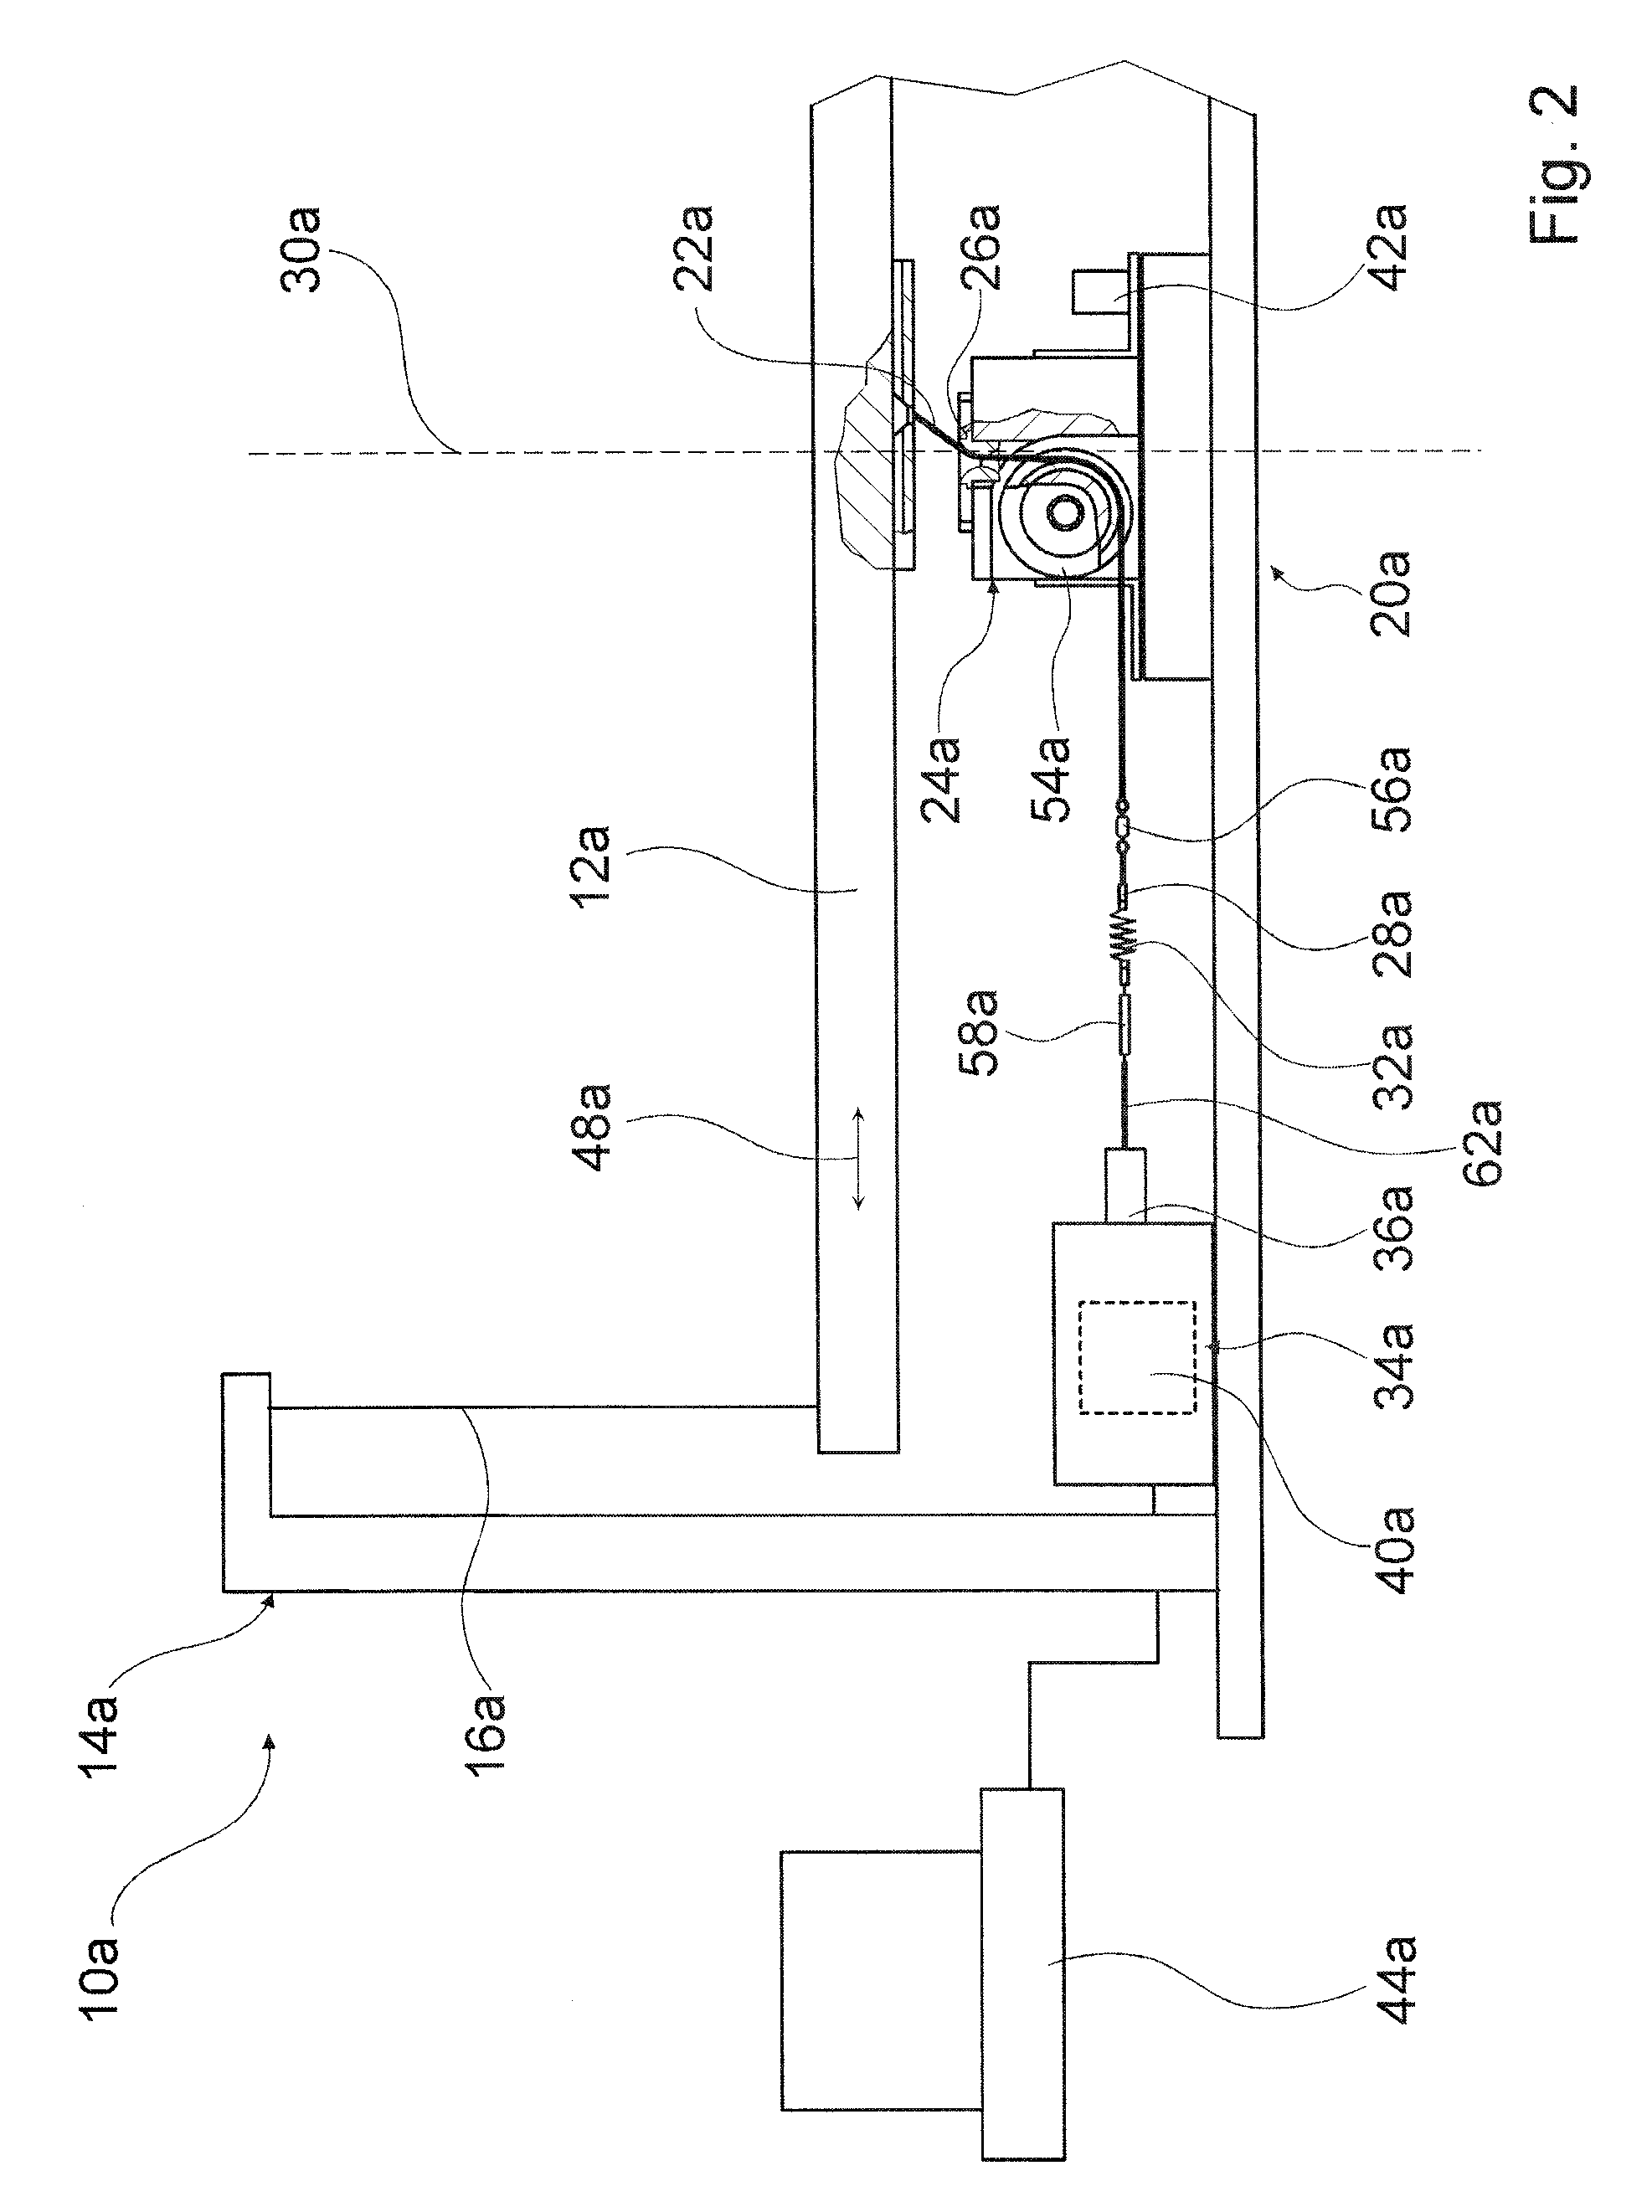 Apparatus, in particular for balance training, having at least one movable platform